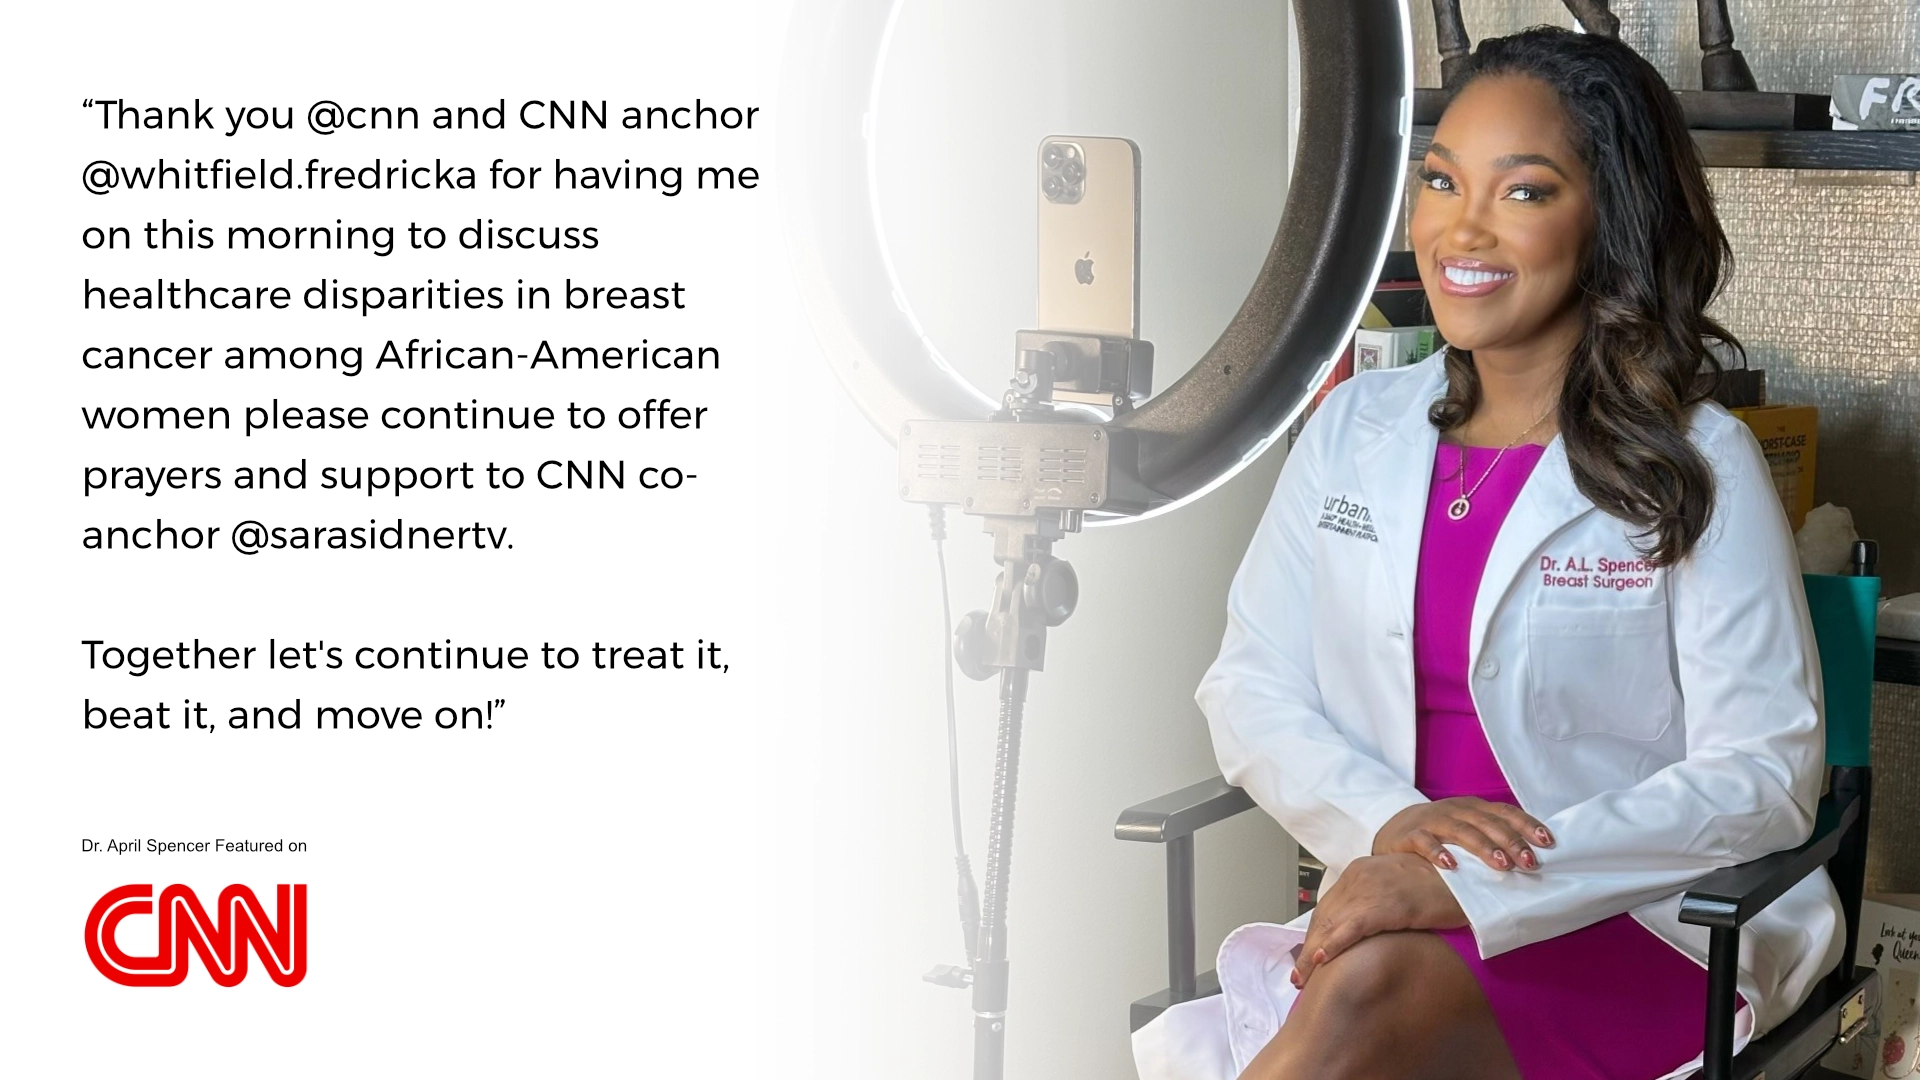 Dr. April Spencer featured on CNN with anchor Fredricka Whitfield